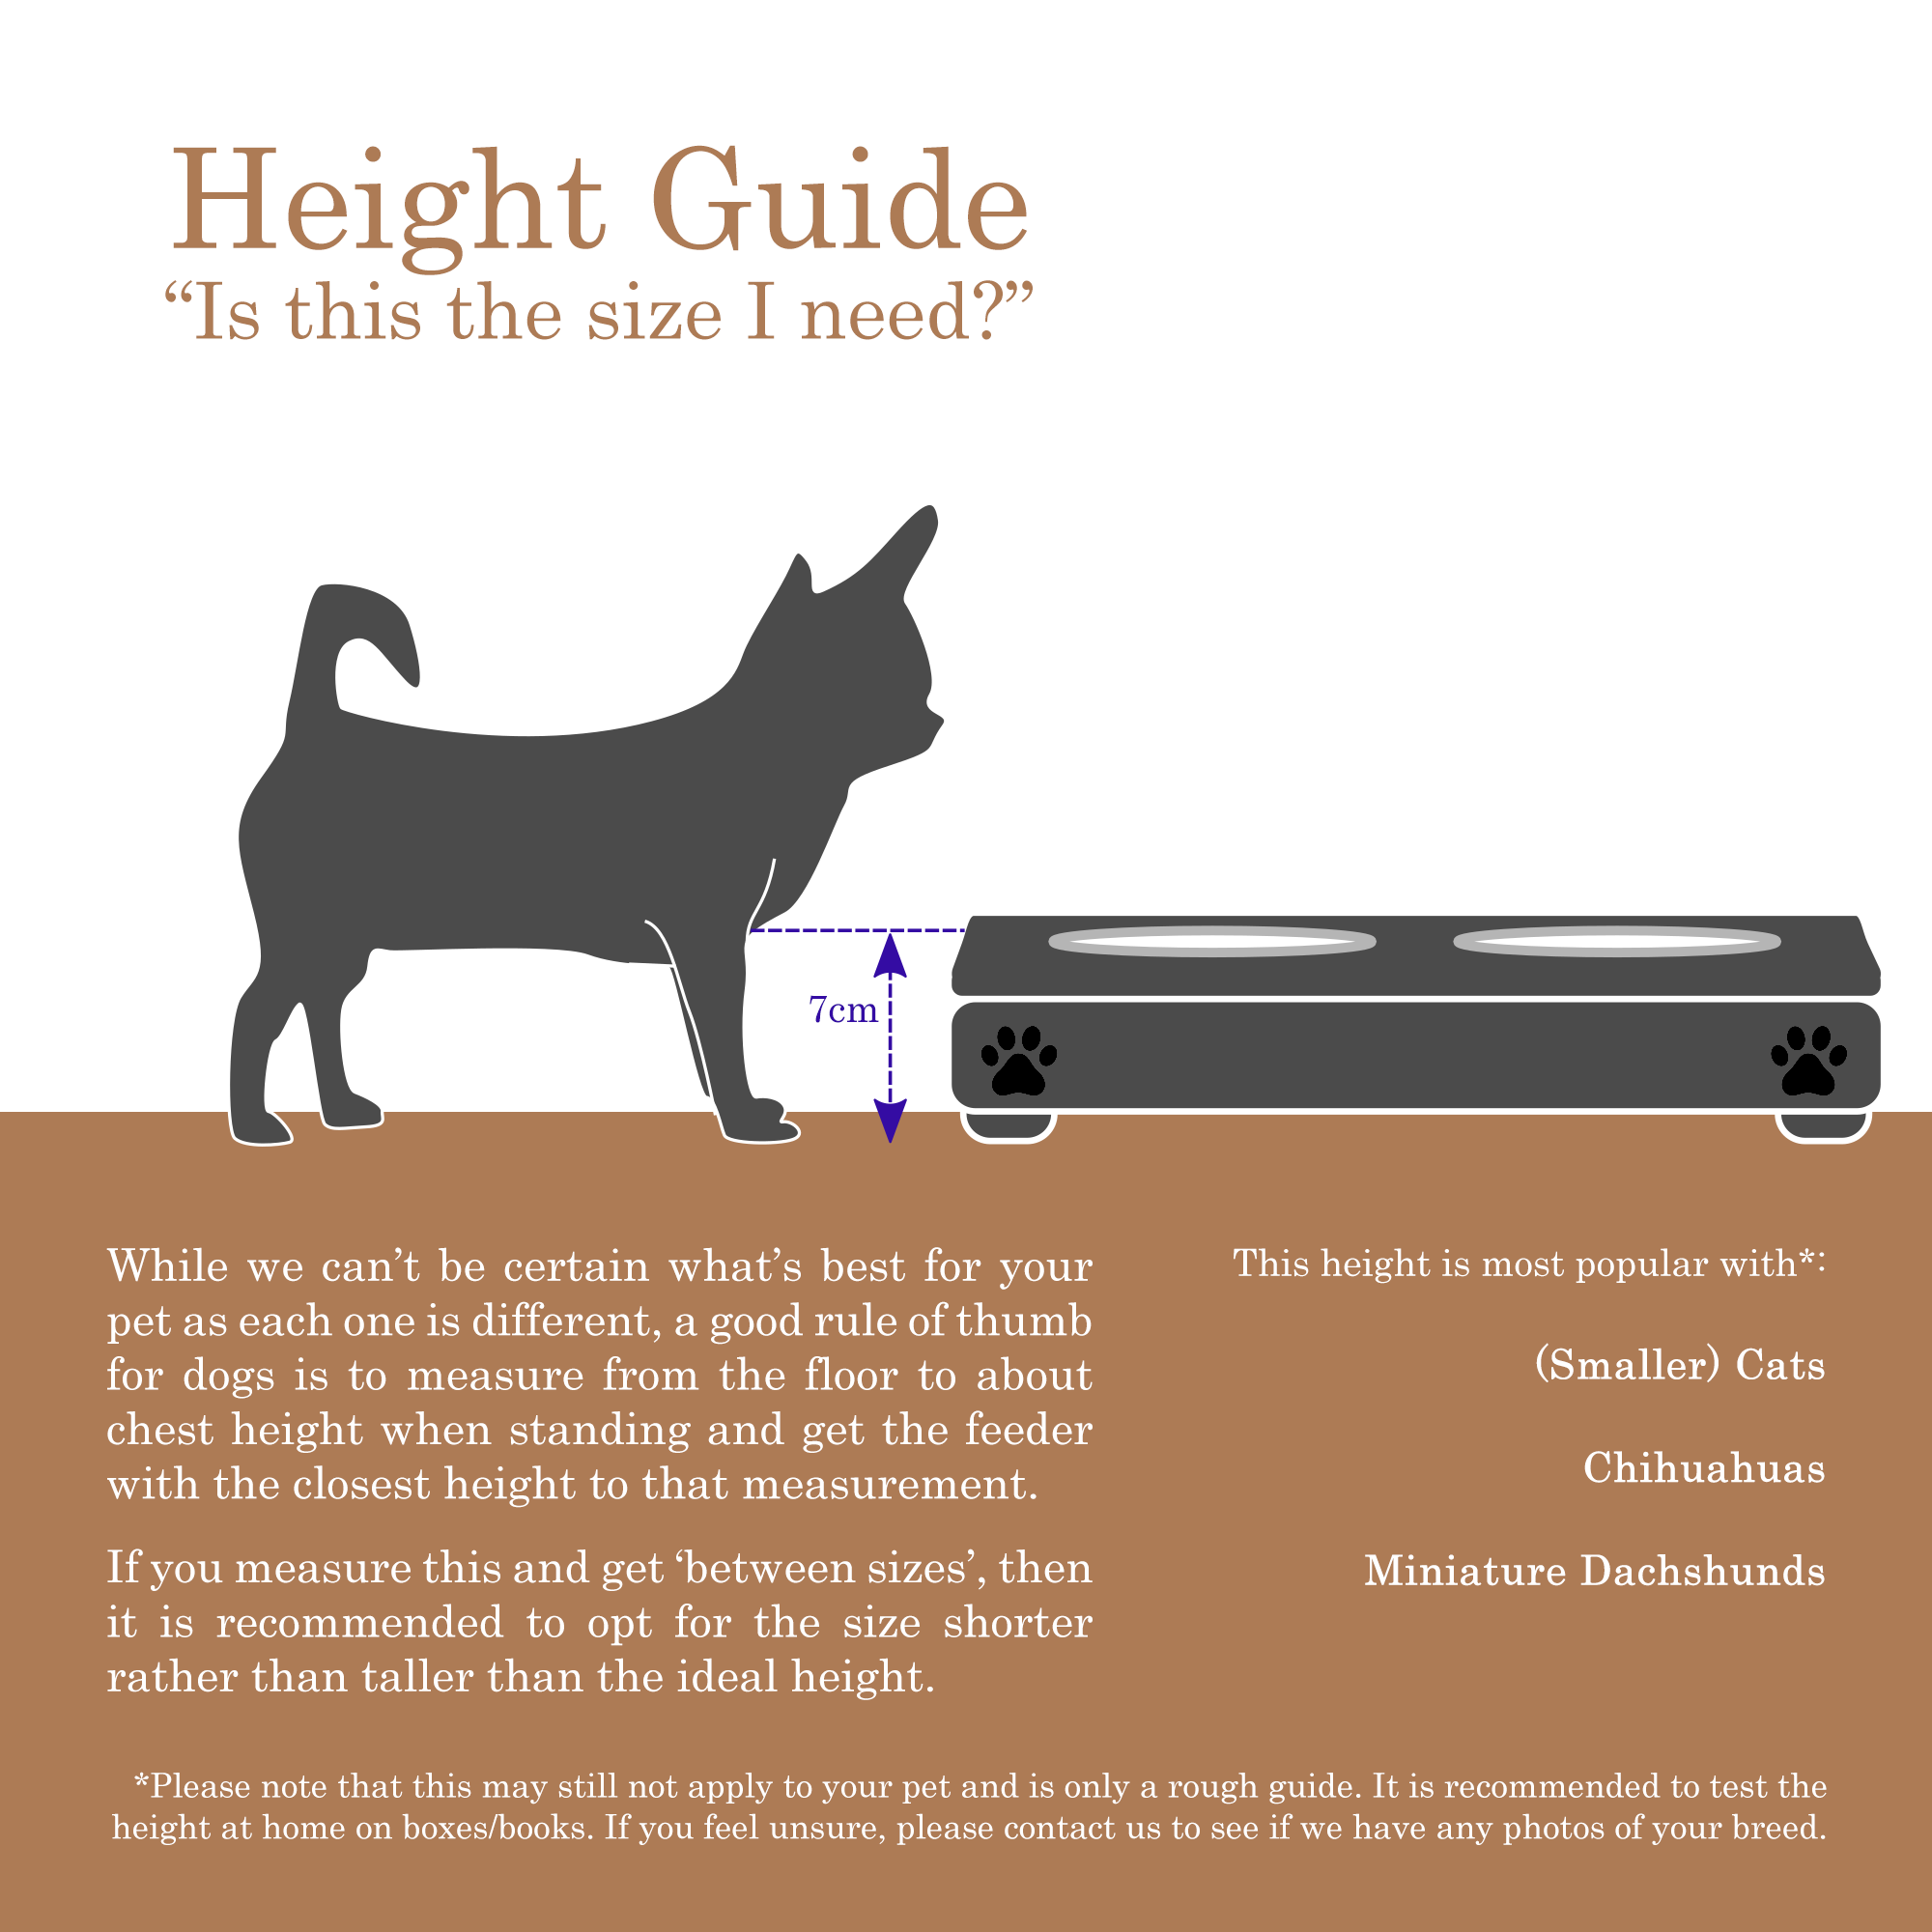 How to find the right bowl size for your pet. Choosing raised bowls for your pet. Elevated bowls for small pets, dogs, cats, how to know the best bowl size for a dog